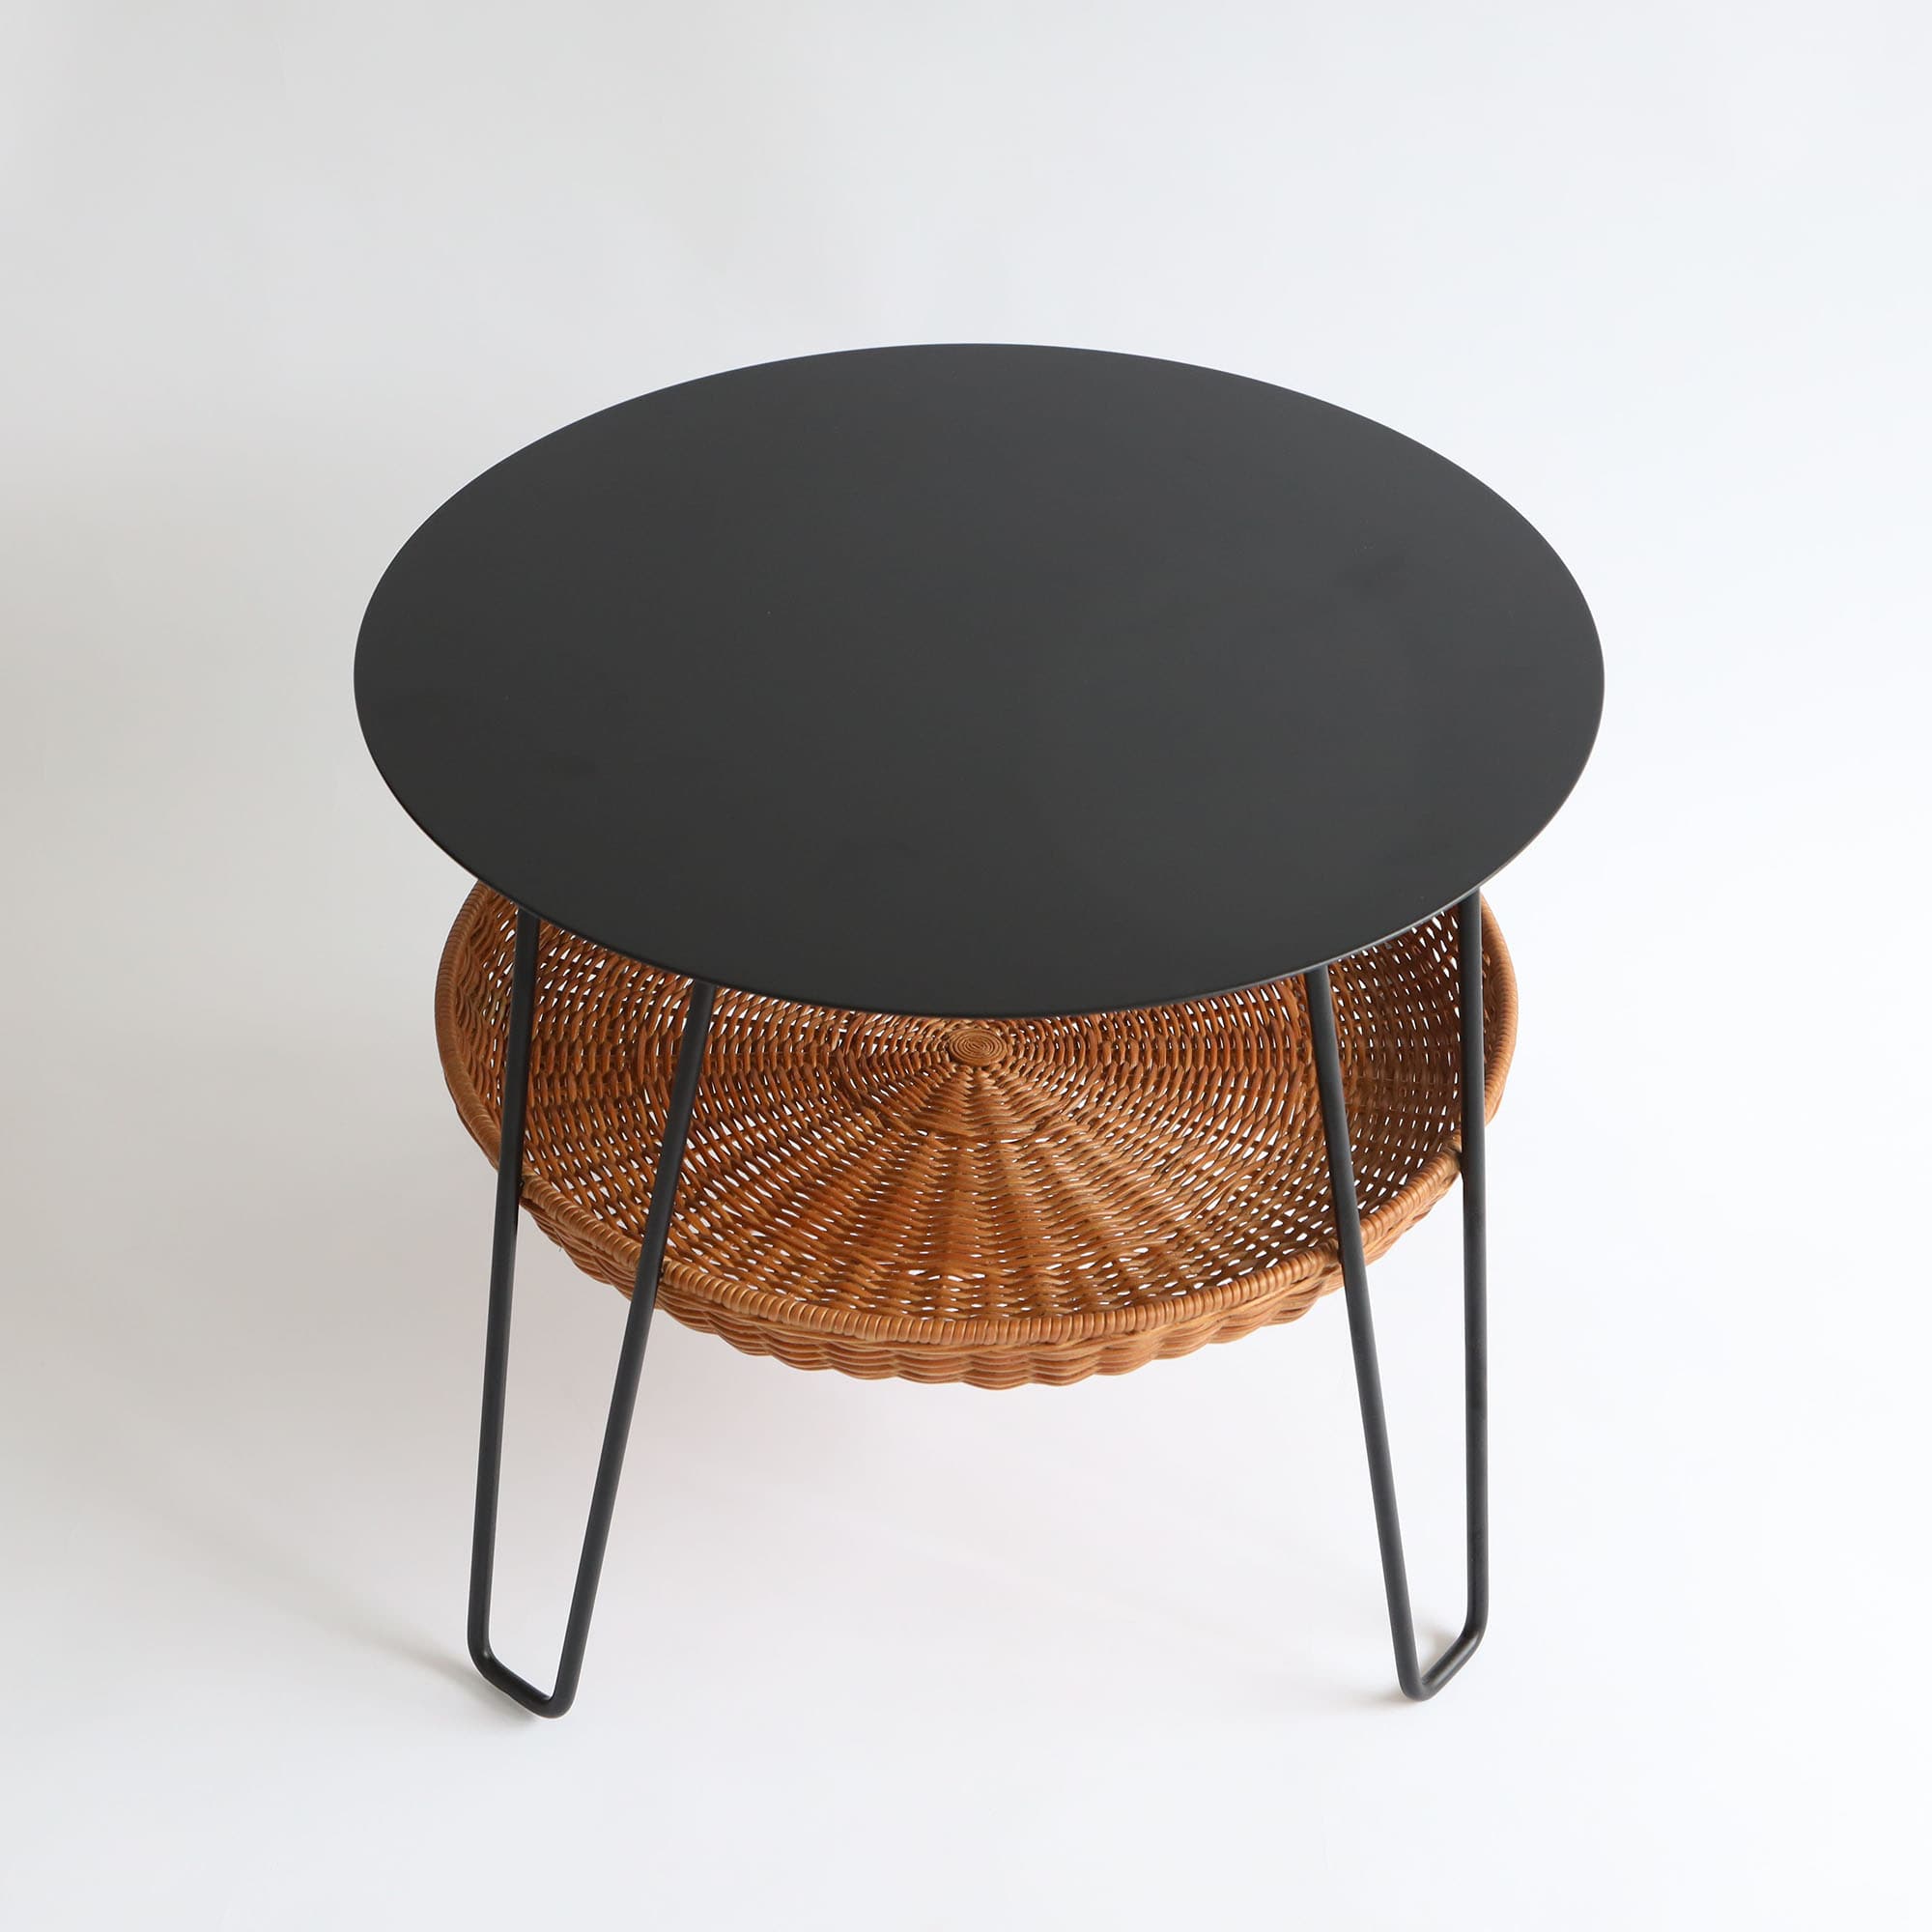 IDEE SHOP Online WALLABY LOW TABLE ROUND Black: テーブル・デスク